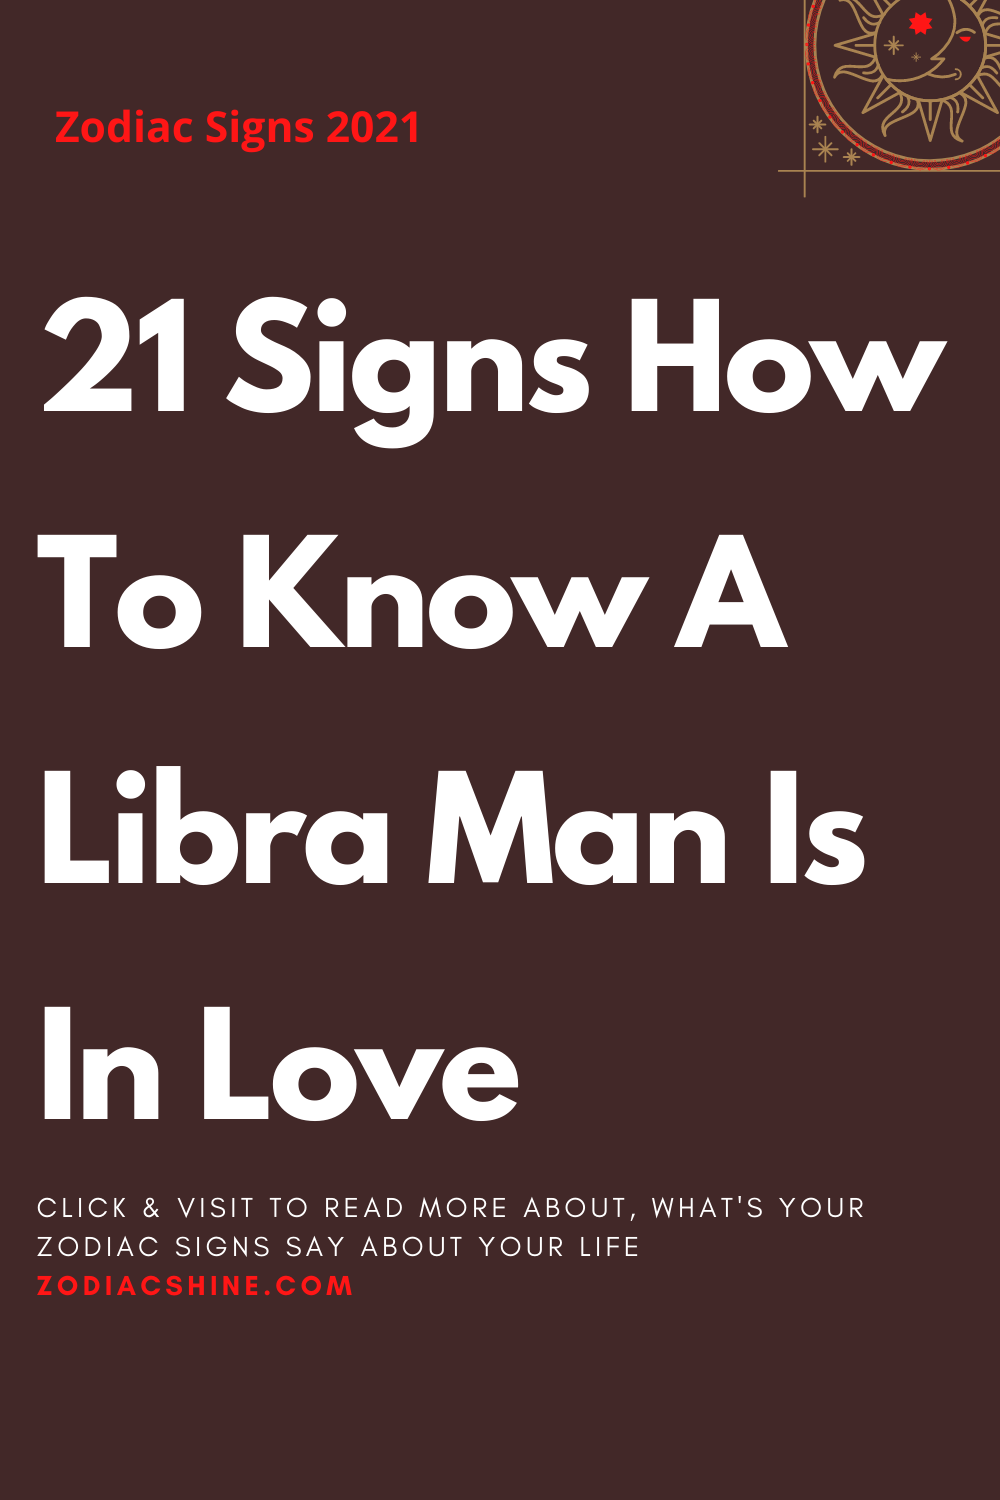 21 Signs How To Know A Libra Man Is In Love